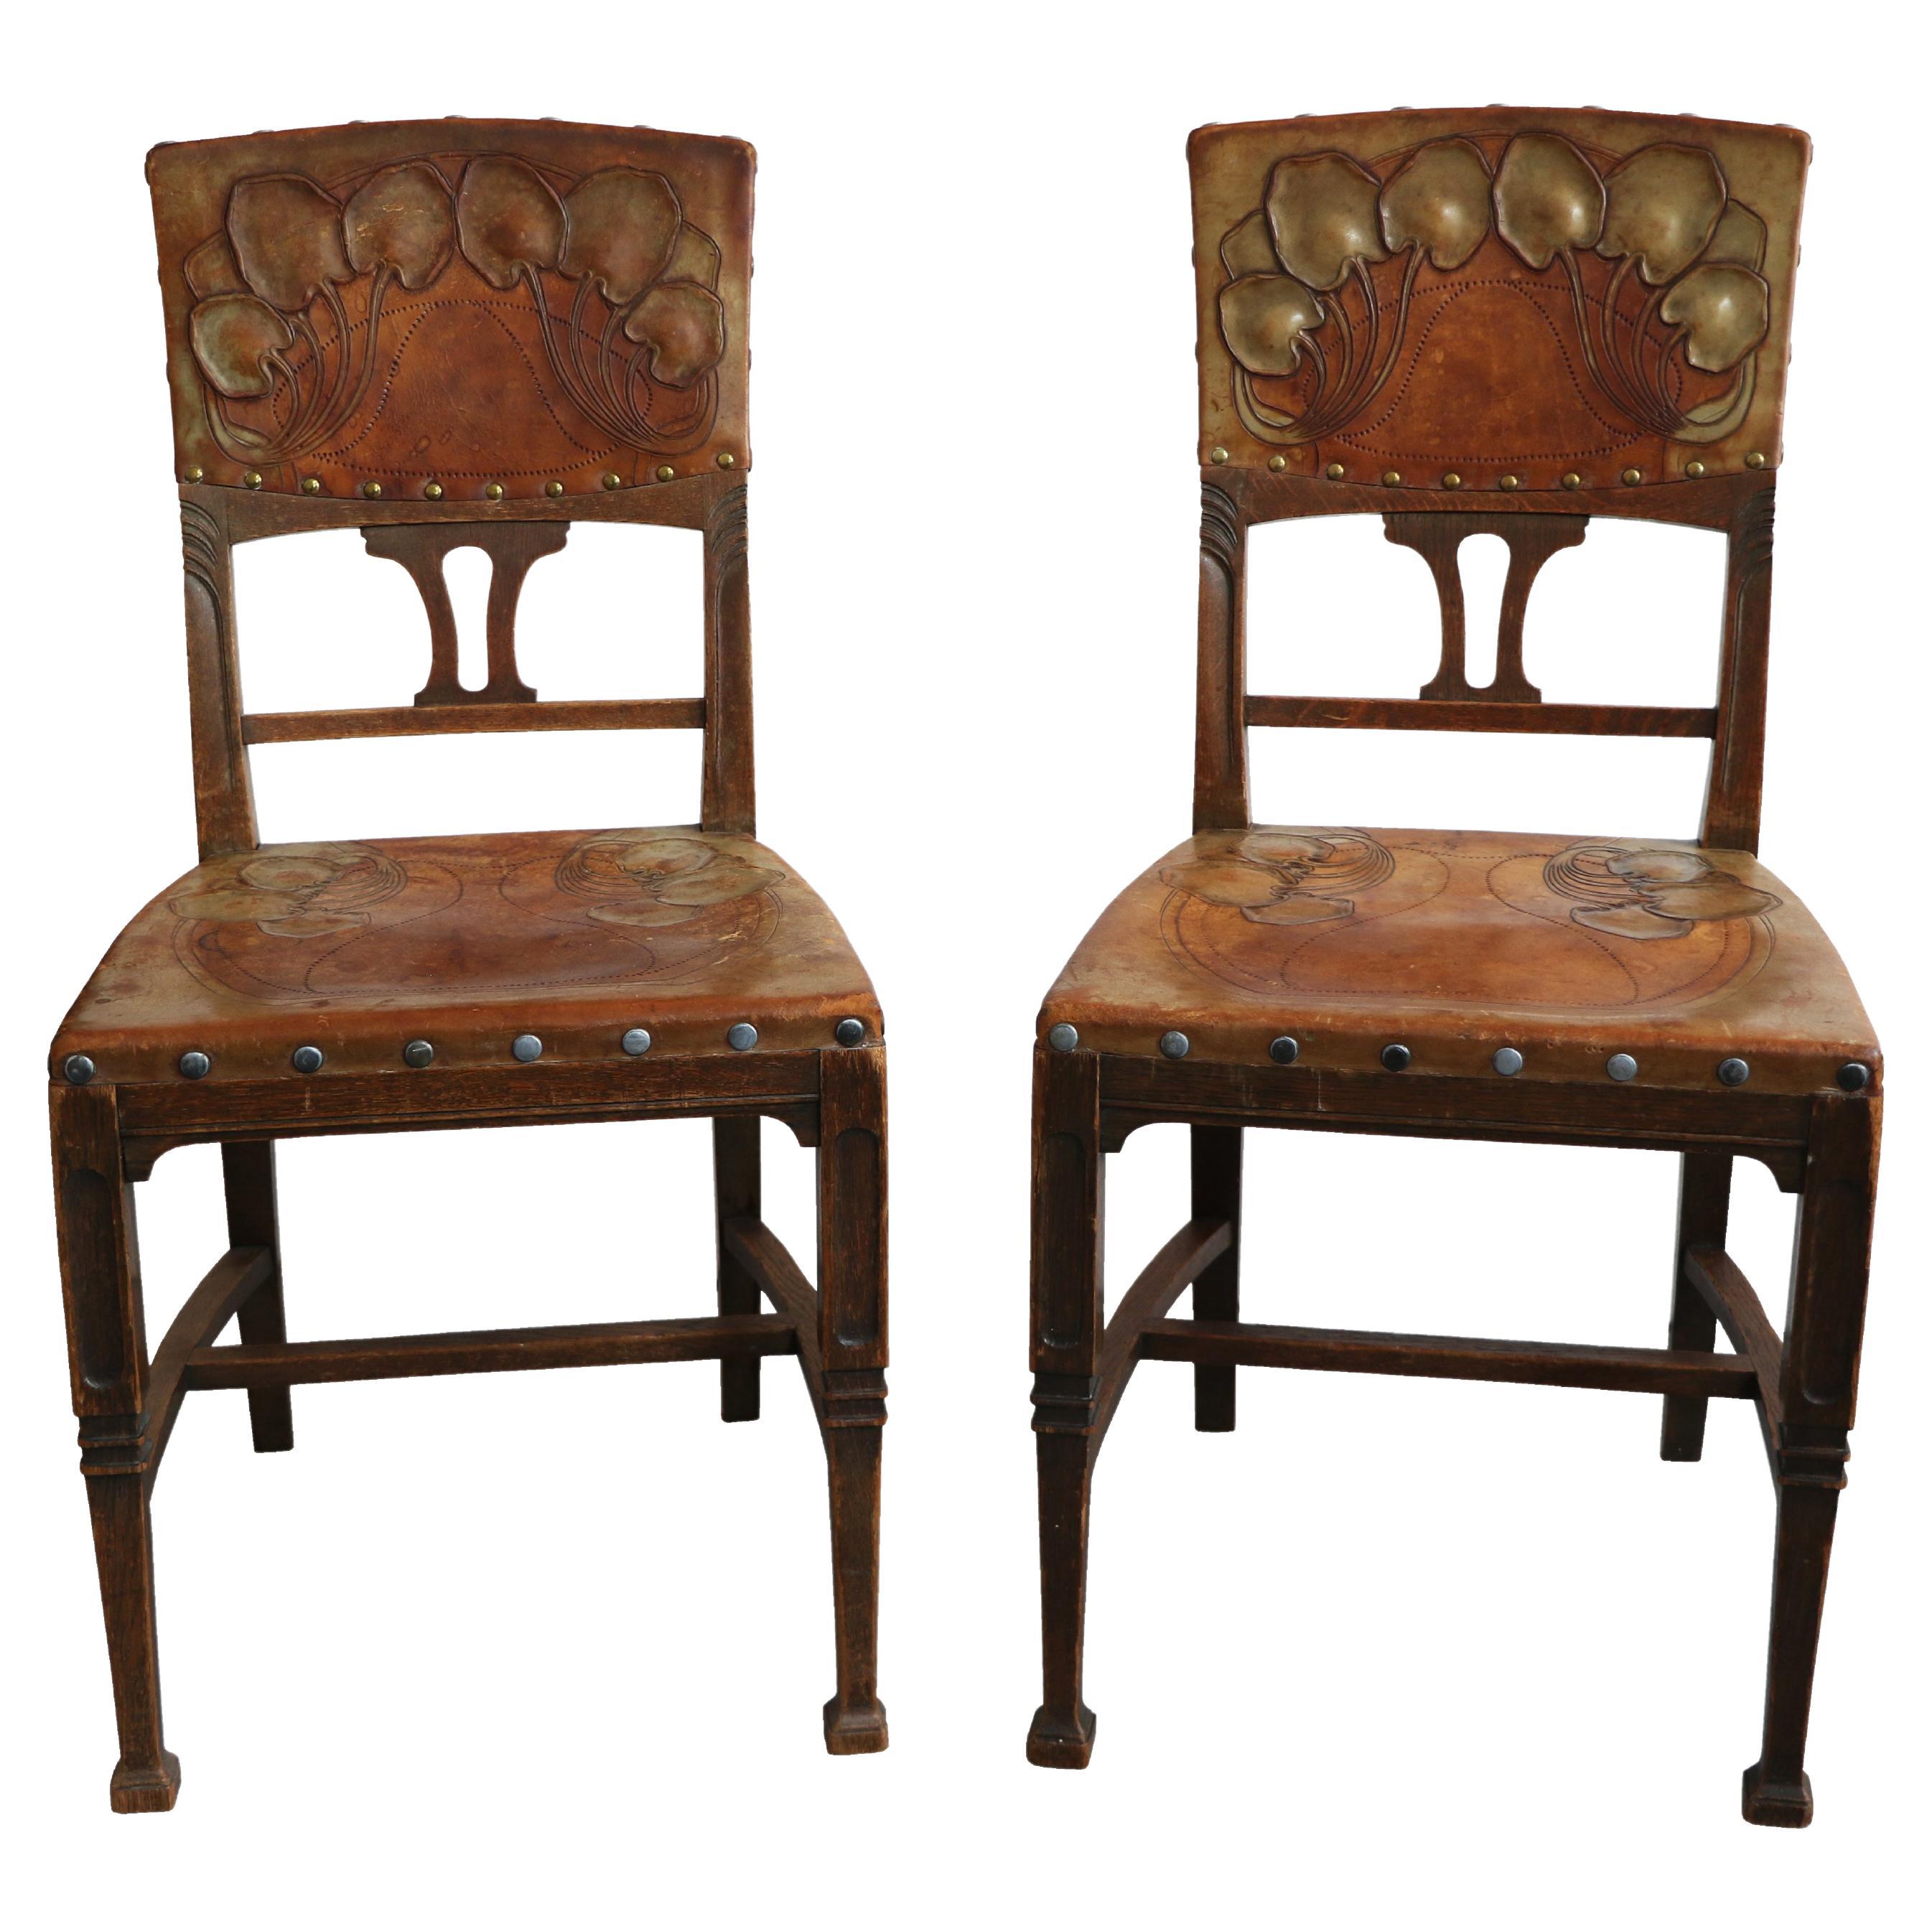 Art Nouveau Set of Six Chairs in Solid Oak, Vienna, circa 1910